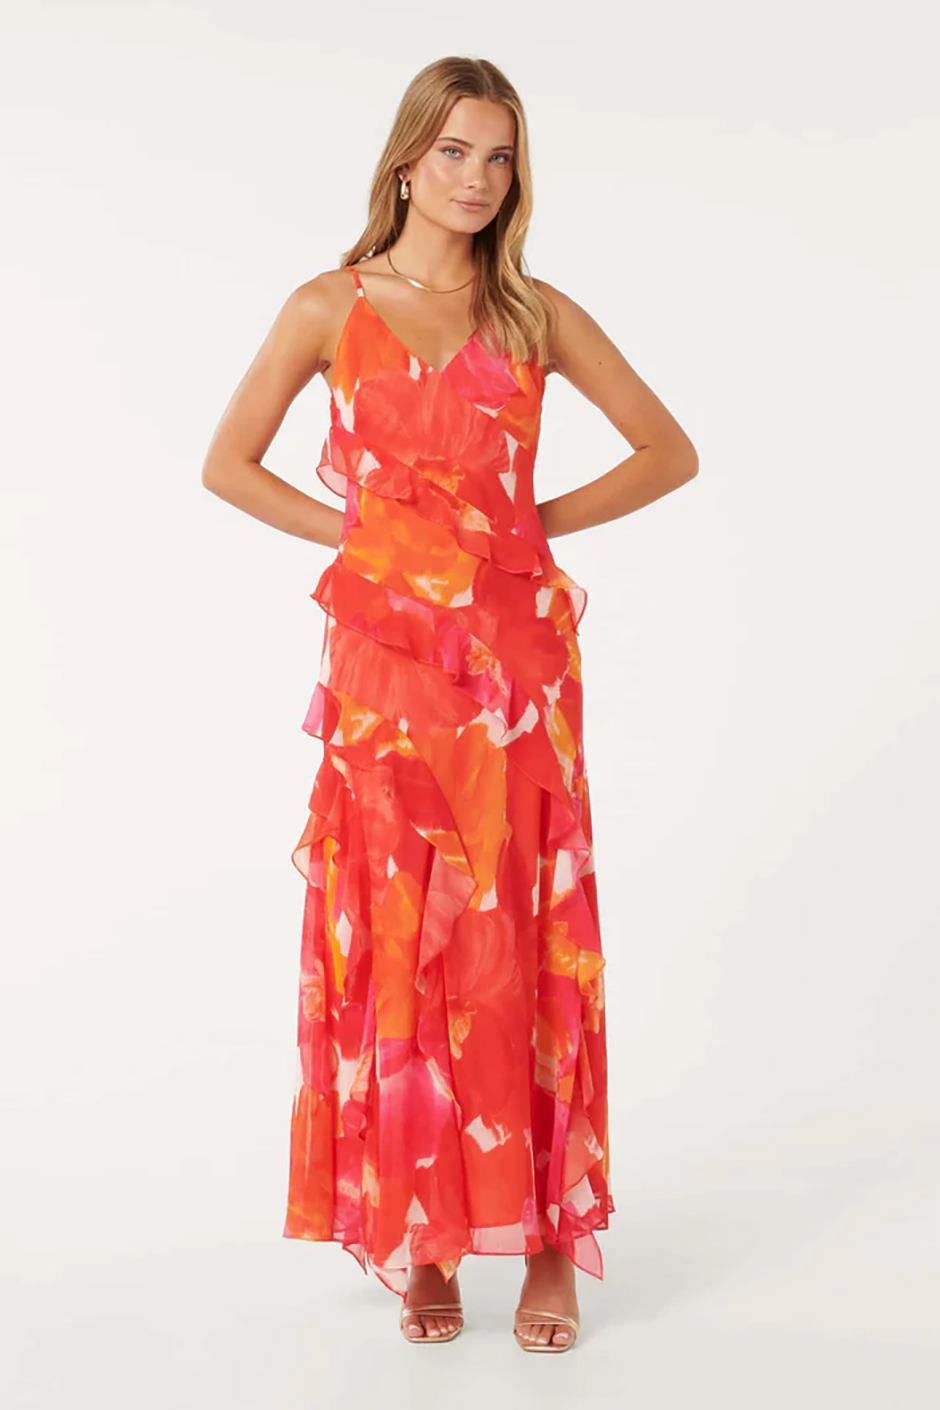 Ruffle maxi dress in sunset tones 'parker floral' colour from Forever New for summer wedding guest dress idea